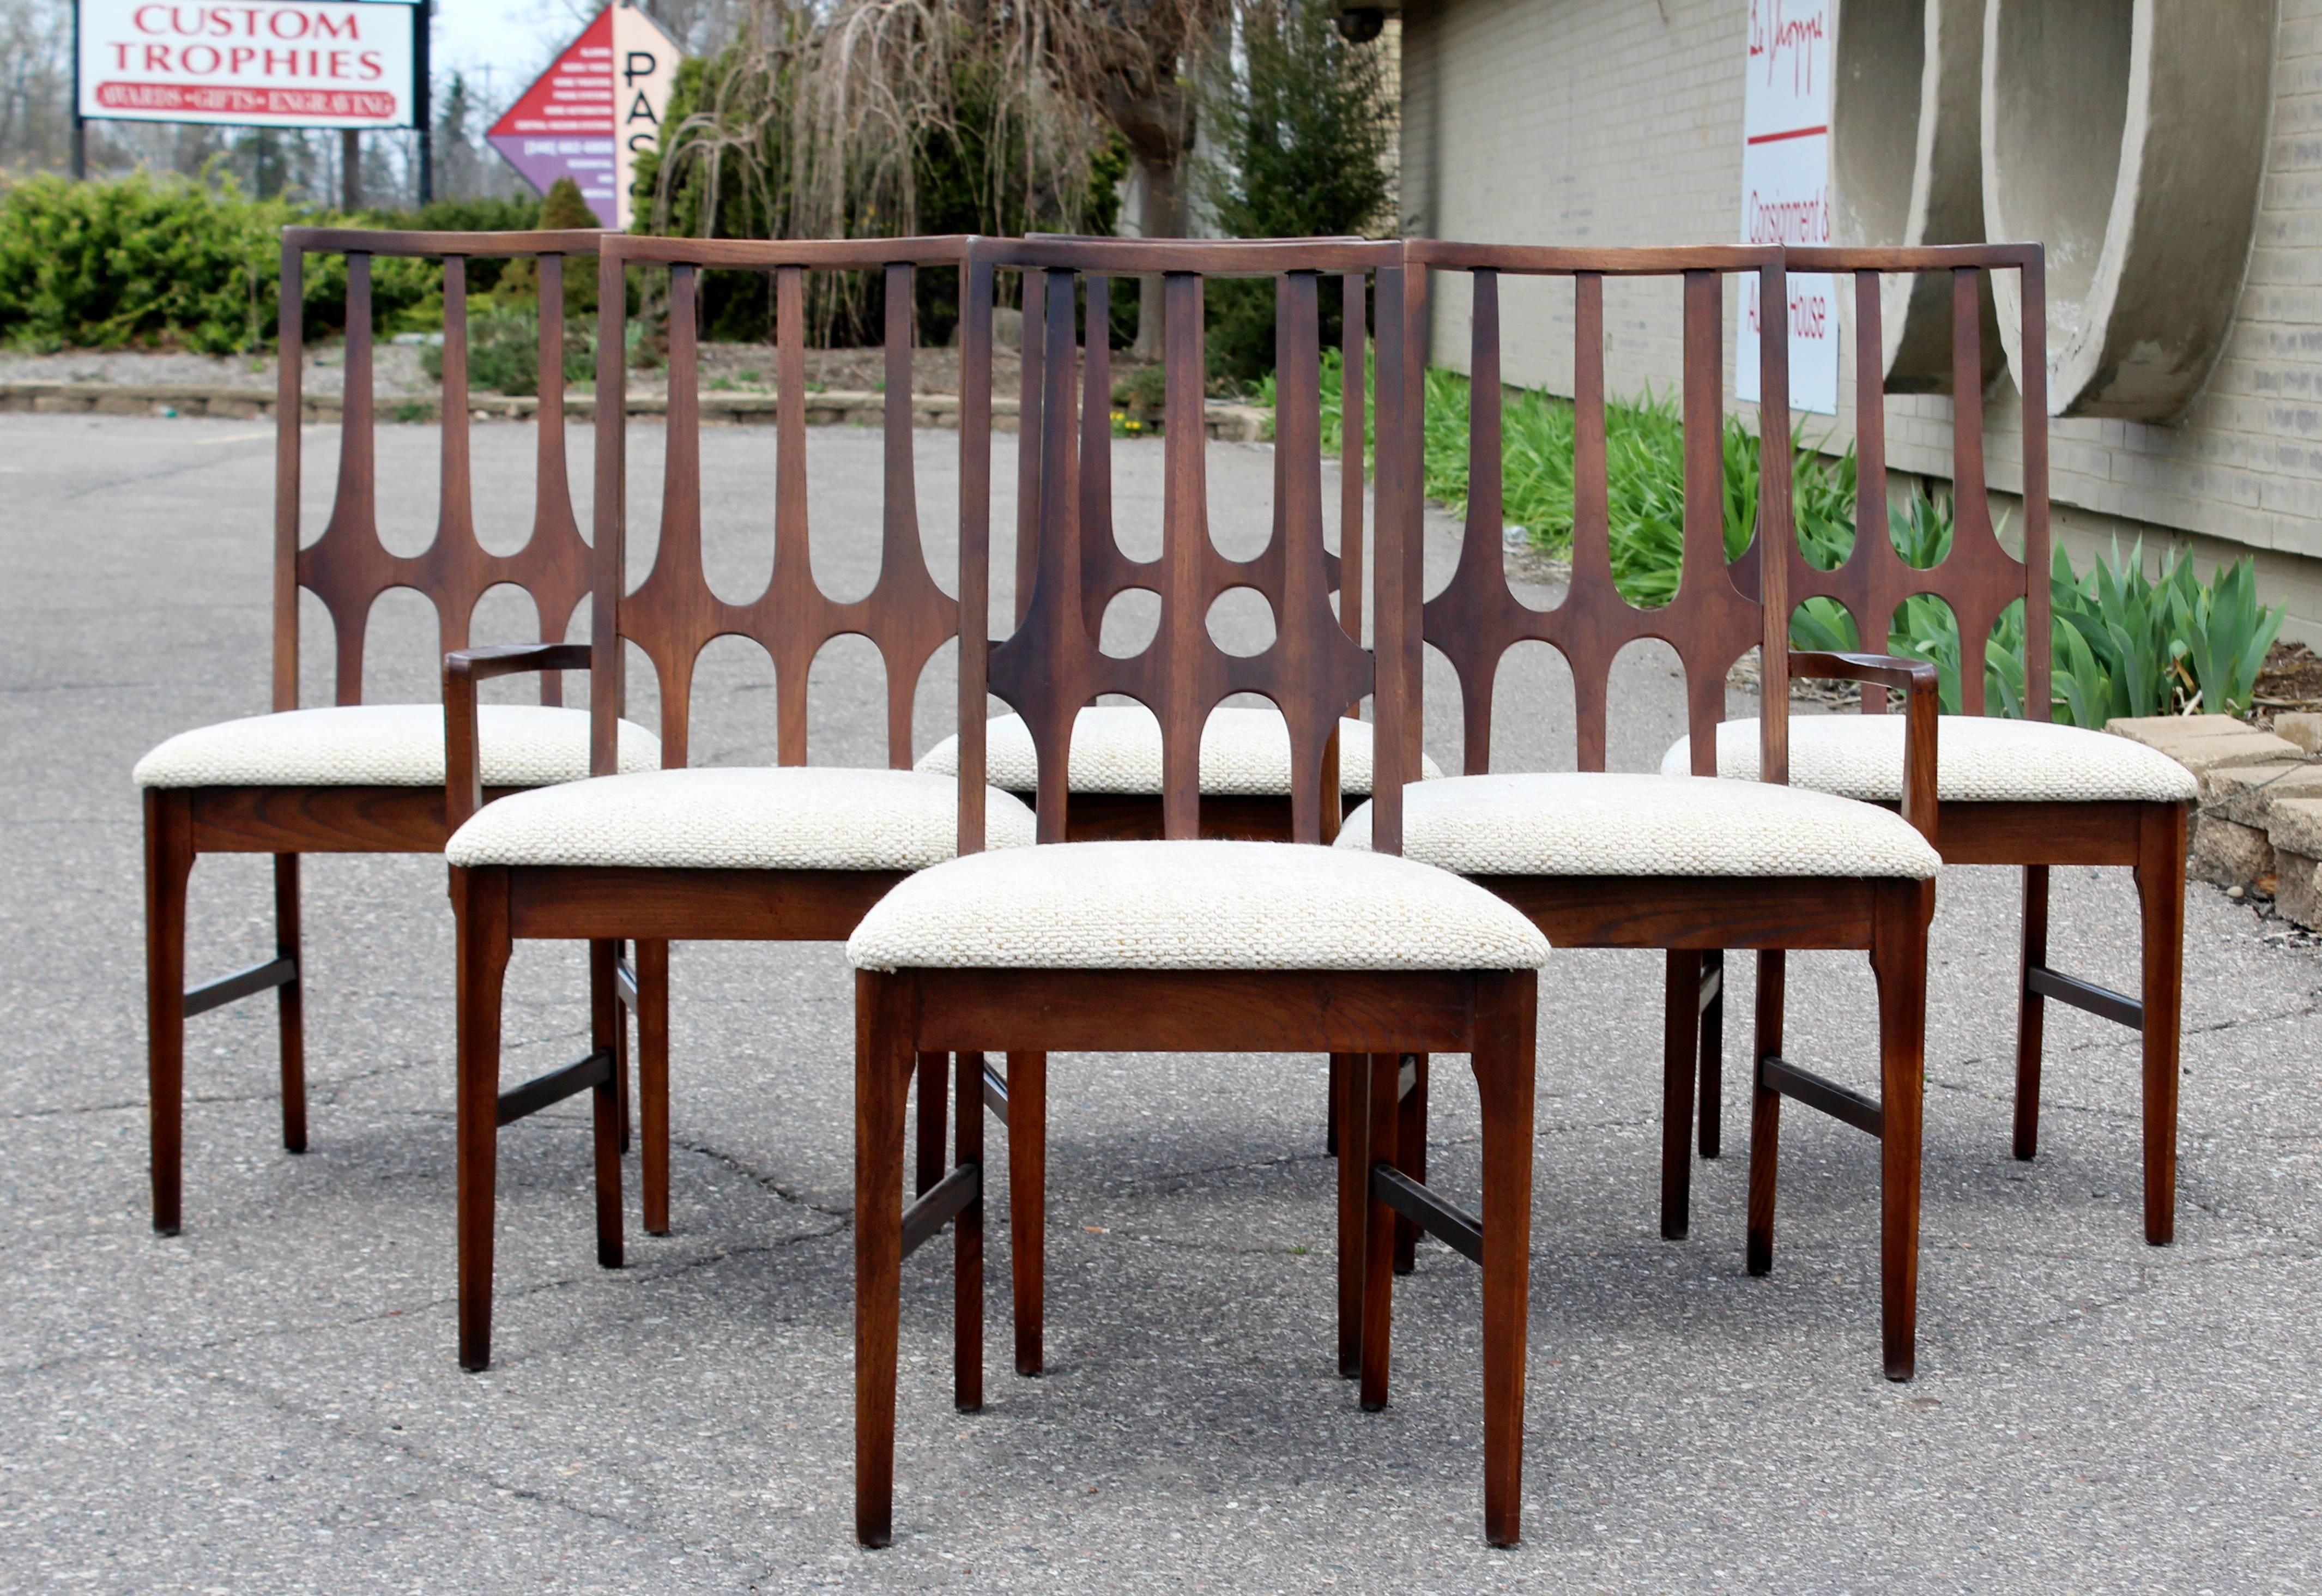 For your consideration is gorgeous walnut wood set of six dining chairs, four side and two with arms, by Oscar Neimeyer for Broyhill Brasilia, circa the 1960s. In excellent condition. Just came back from being professionally reupholstered. The